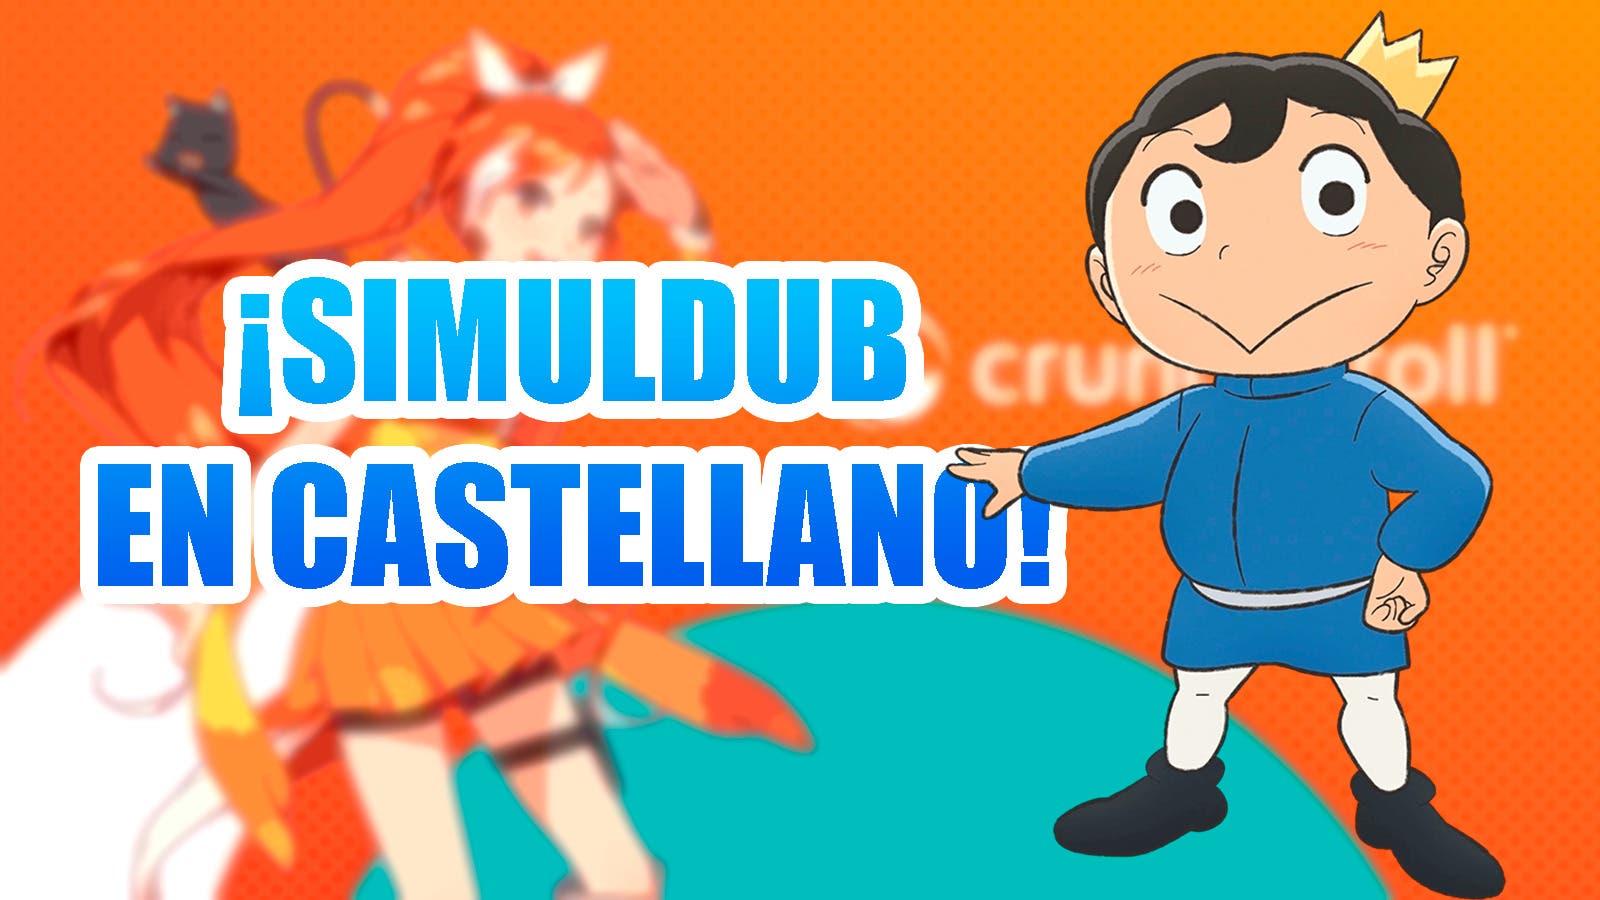 Crunchyroll takes anime to the next level: Spanish language simuldubs are coming